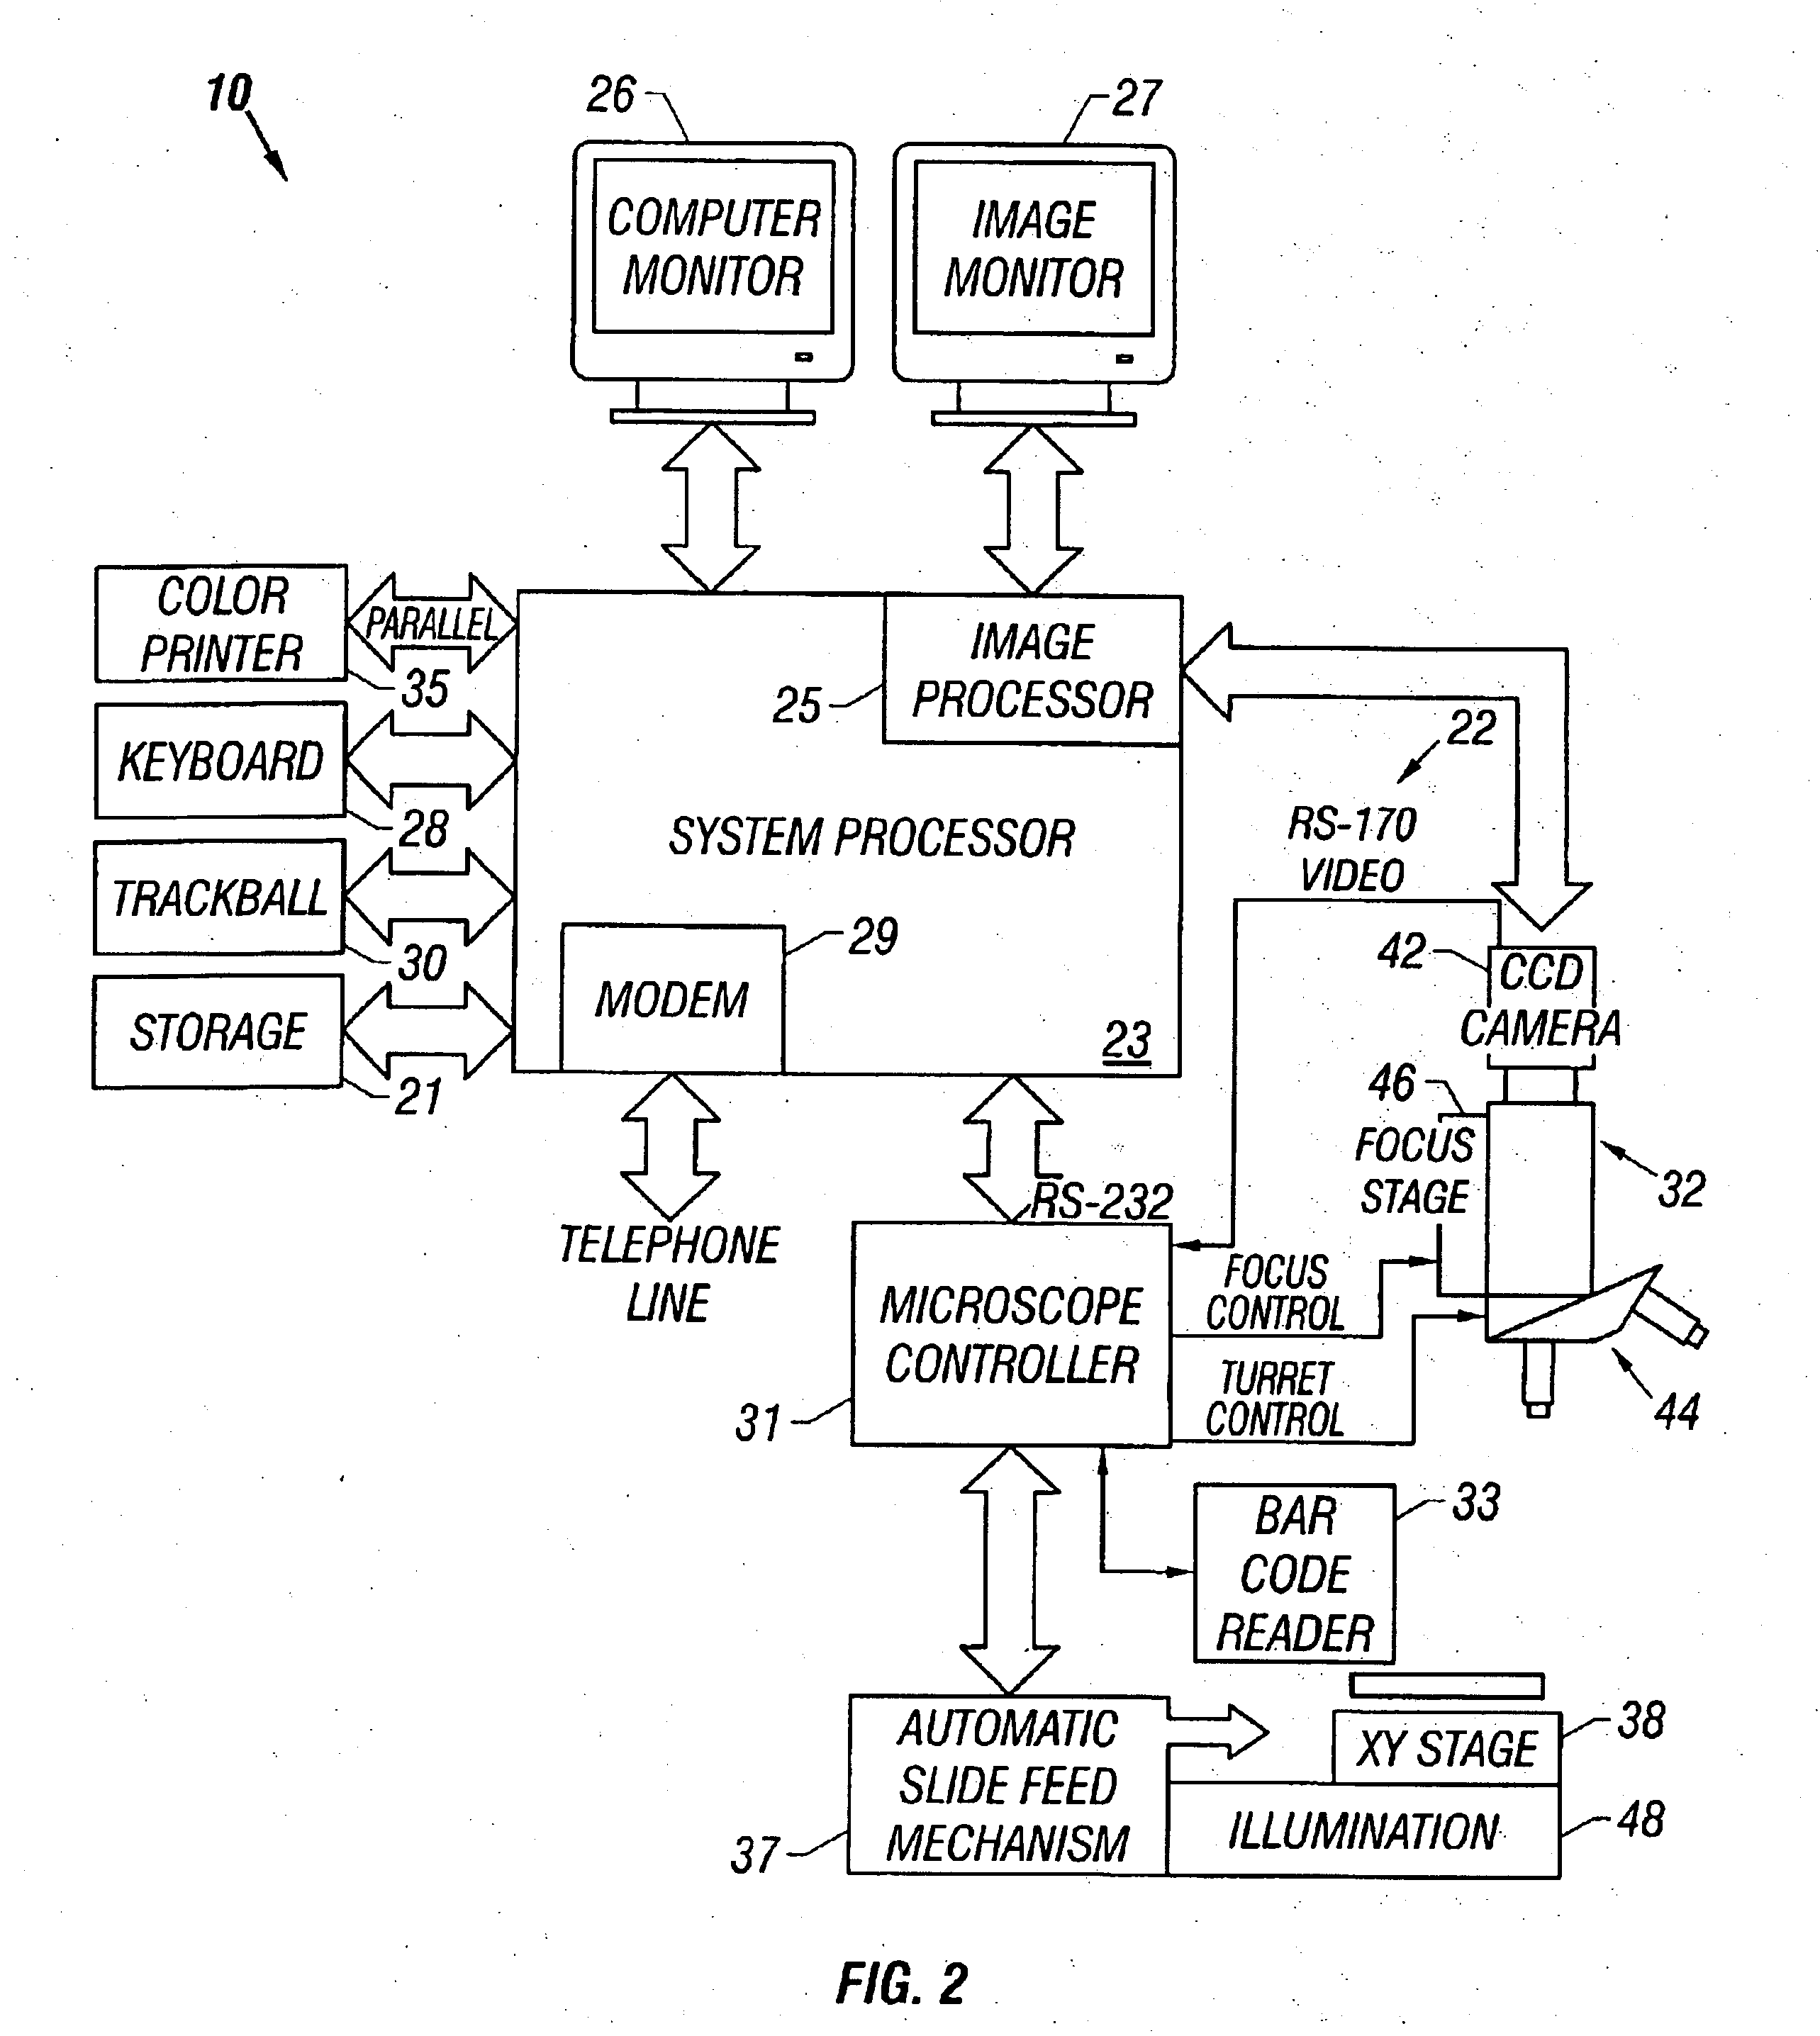 Method and apparatus for automated image analysis of biological specimens